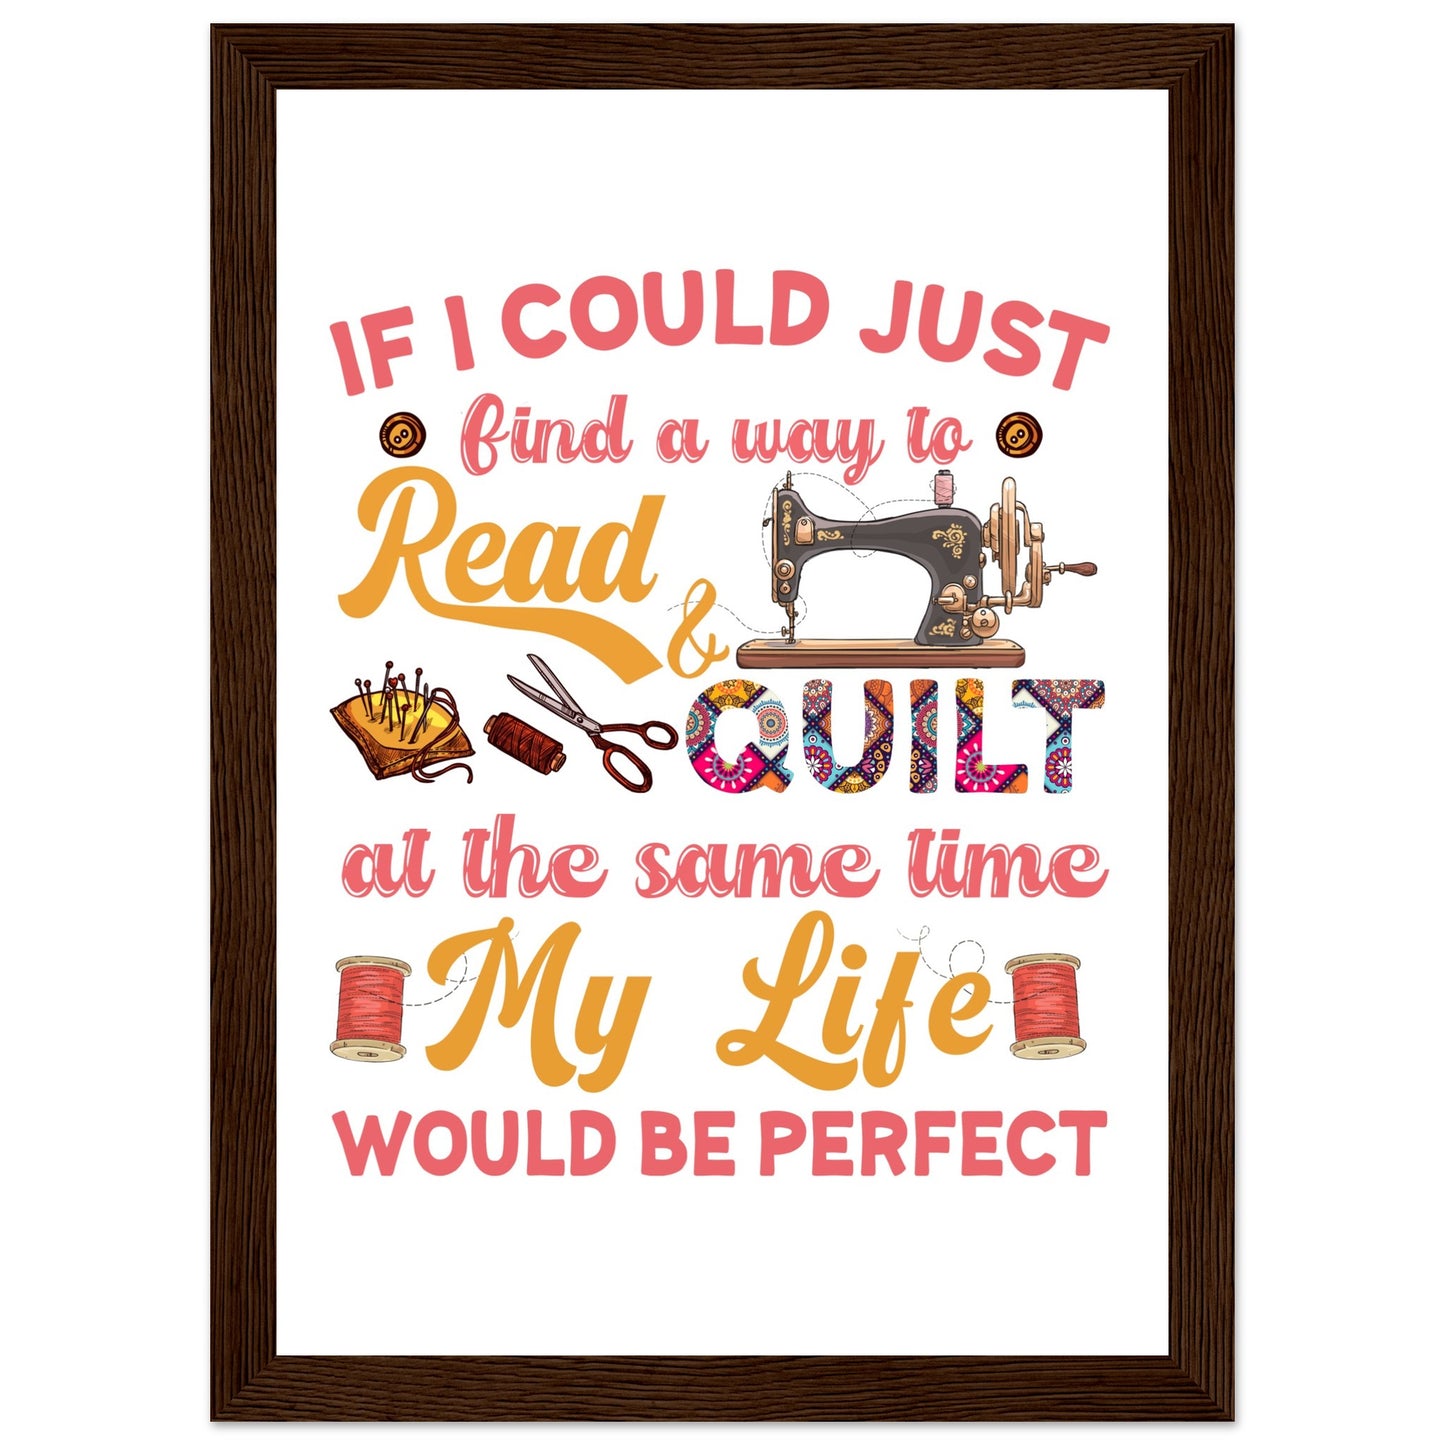 If I Could Just Find a Way to Read & Quilt at the Same Time My Life Would Be Perfect - Quilting Wall Art - Premium Matte Paper Wooden Framed Poster